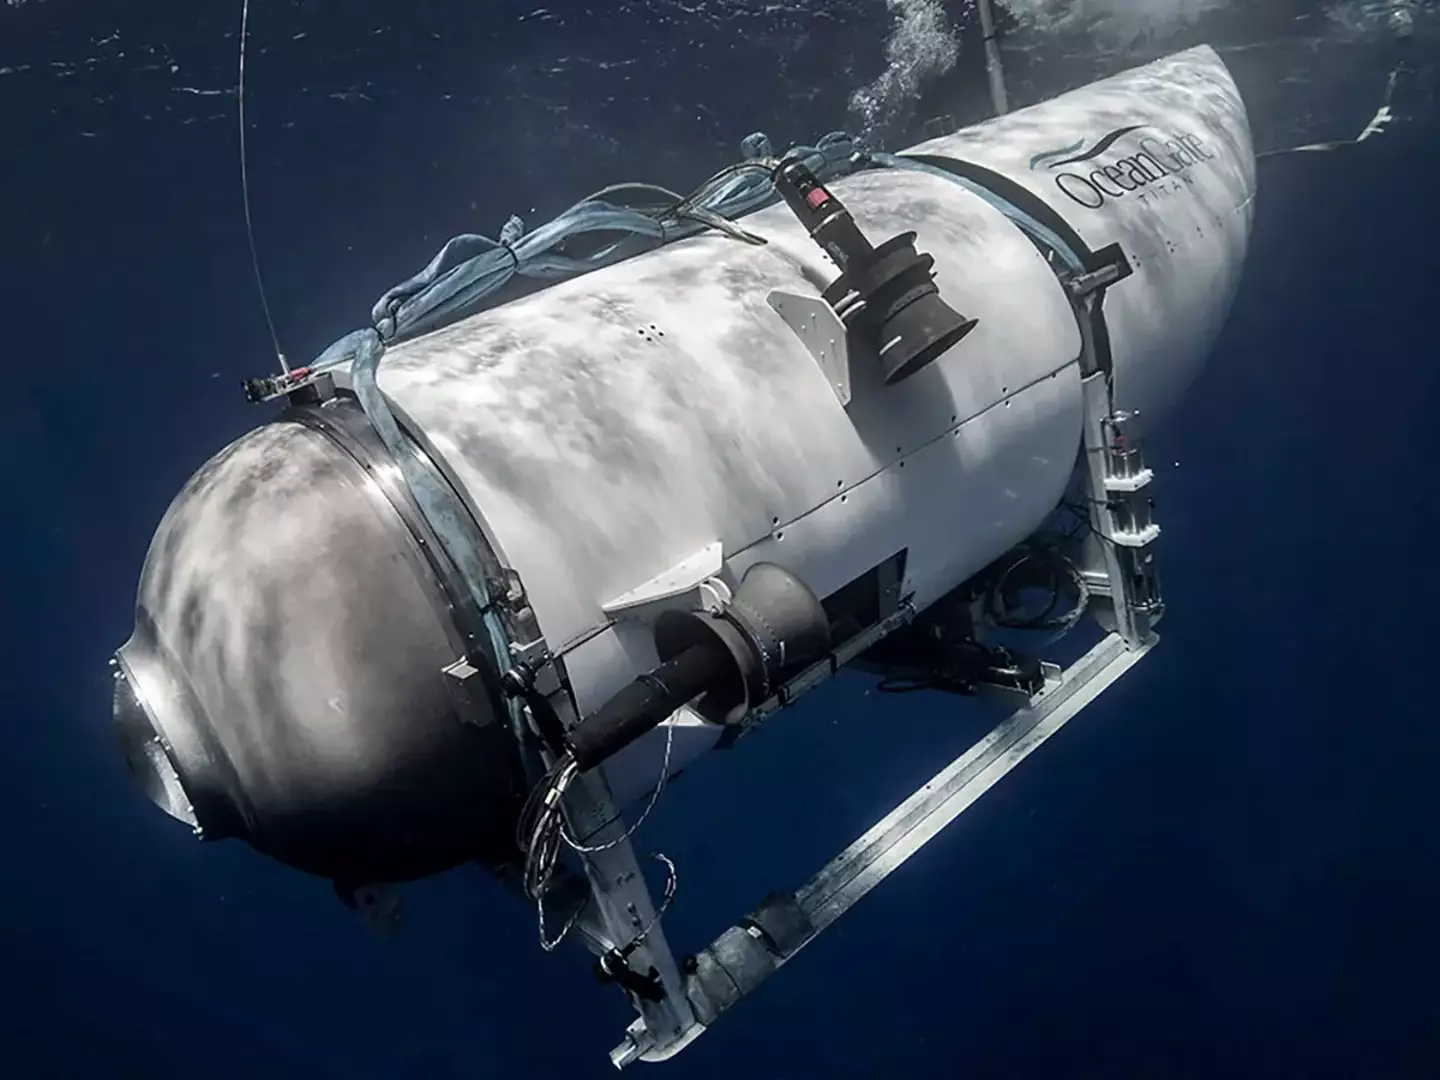 The OceanGate Titan submersible suffered a 'catastrophic implosion'.